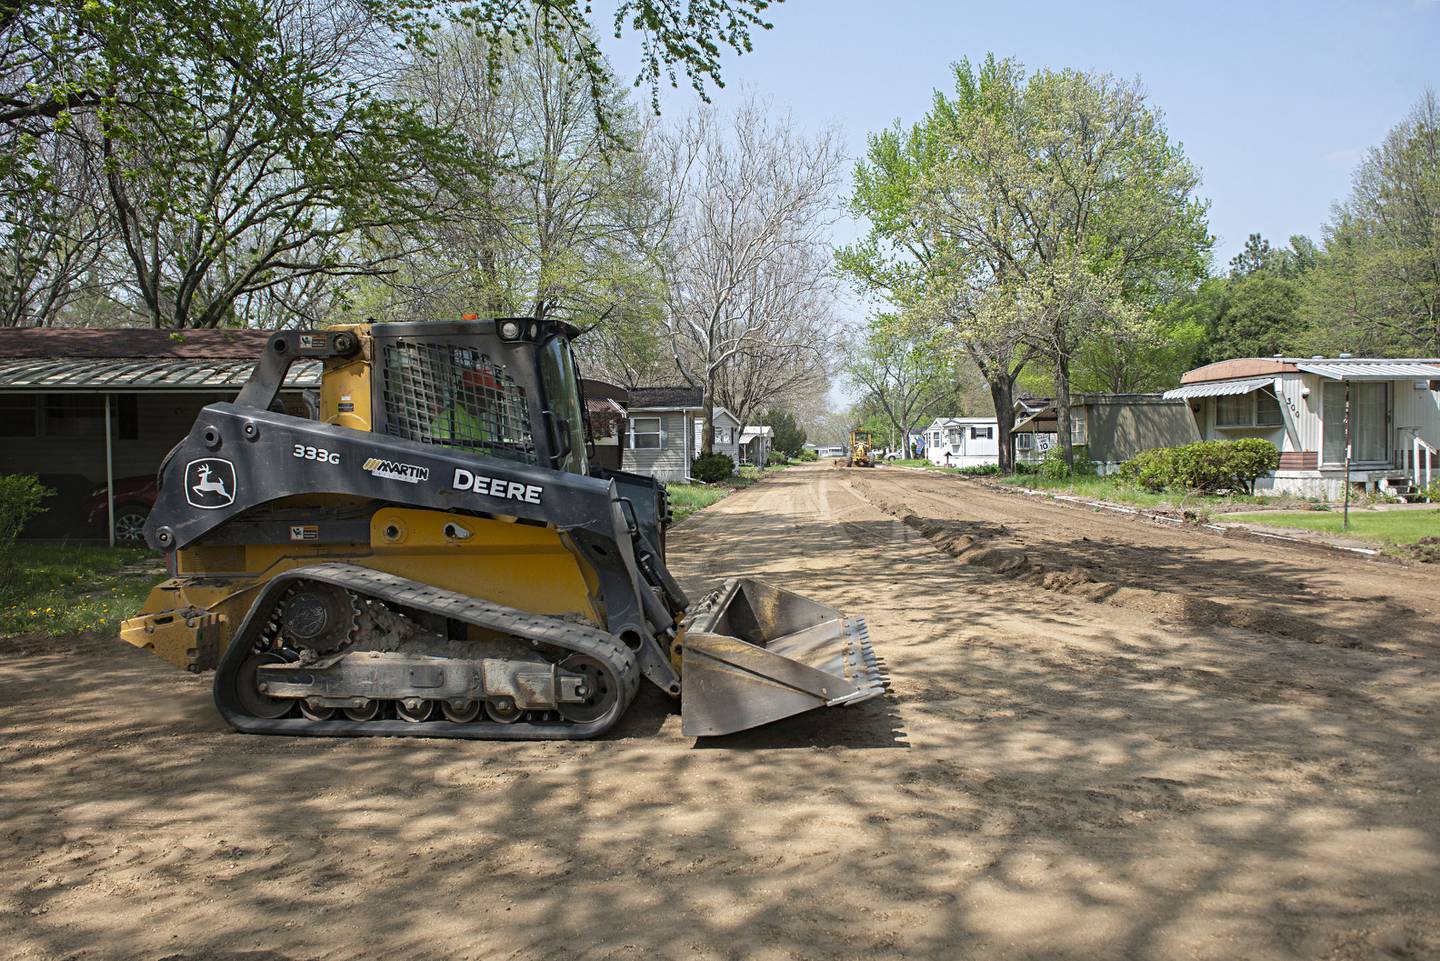 One of the first acts of renovation was started this week with the repaving of the roads in the park.